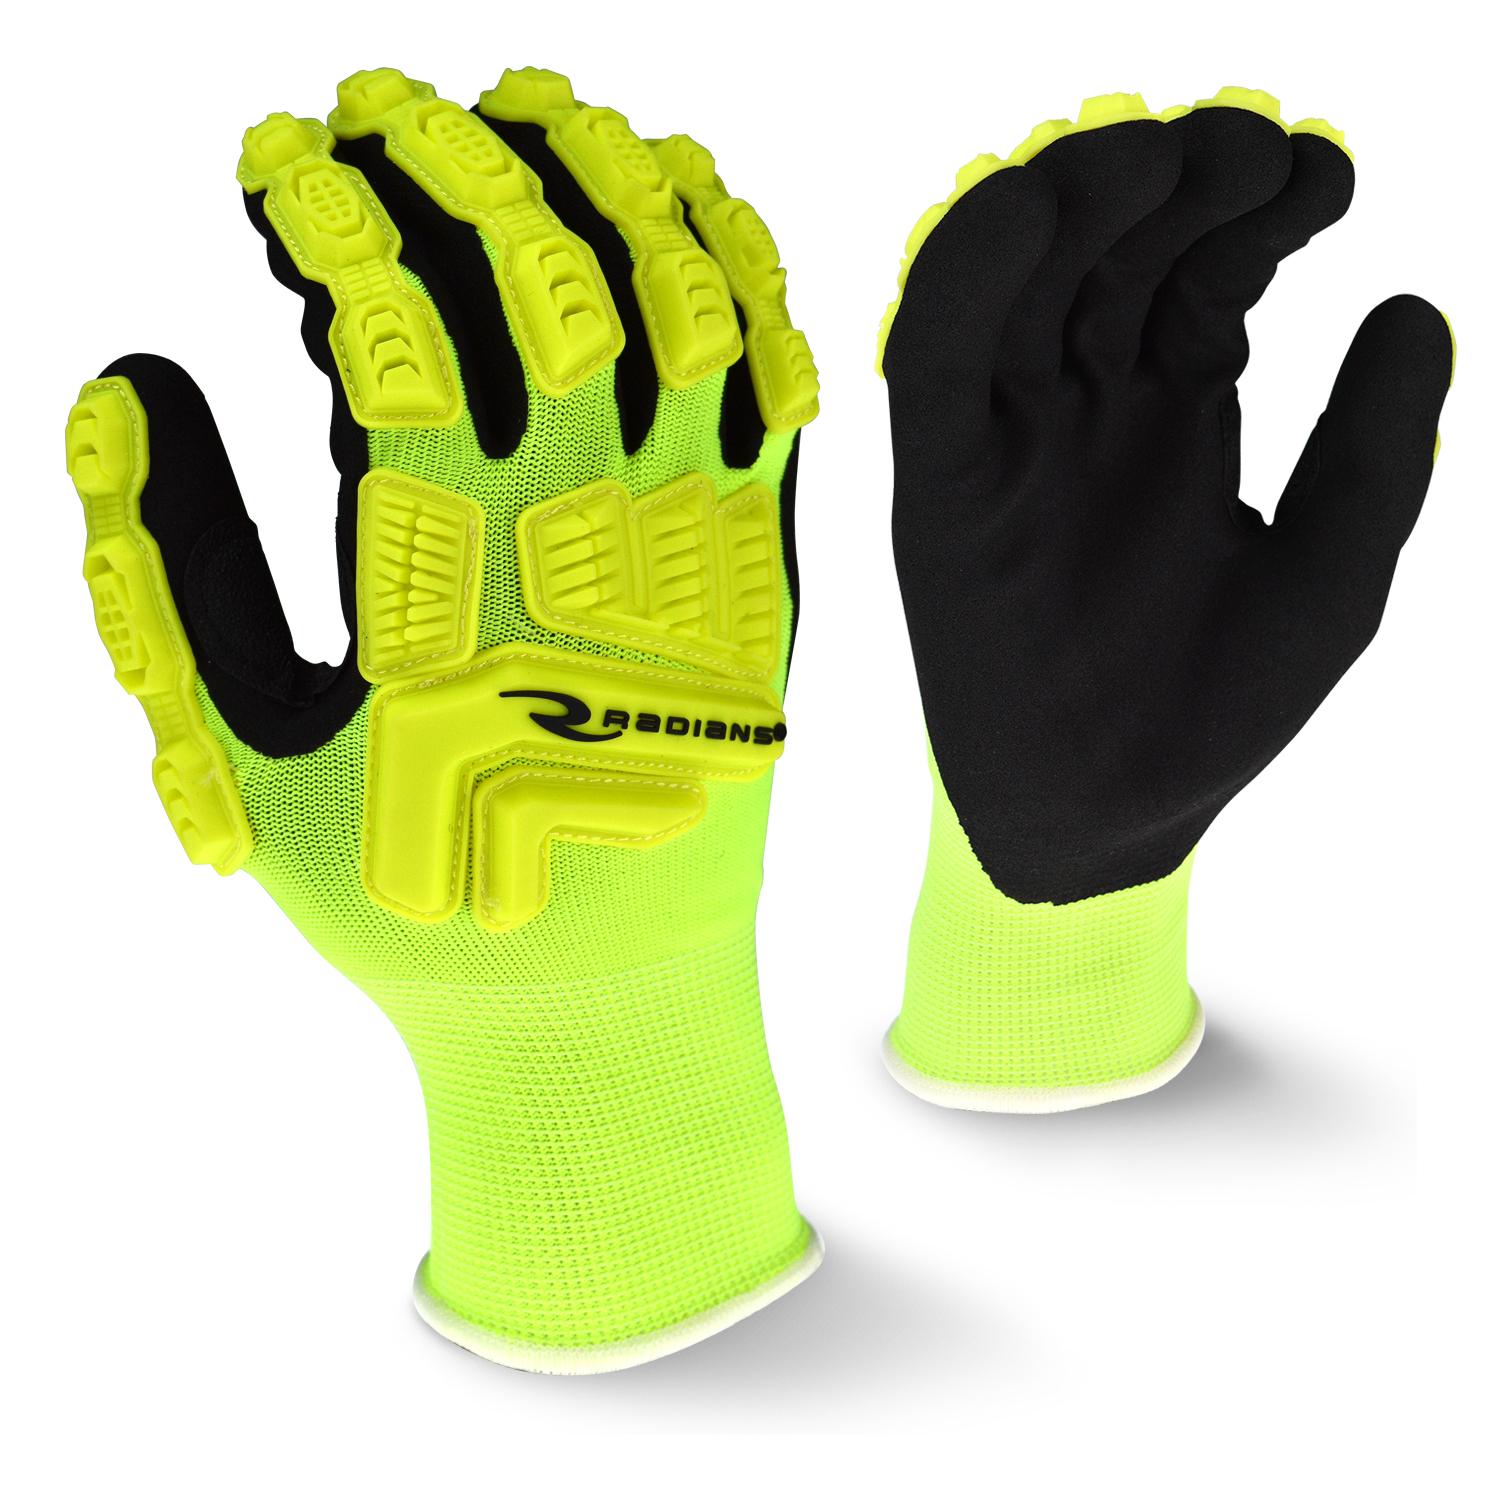 RWG21 High Visibility Work Glove with TPR - Size 2X